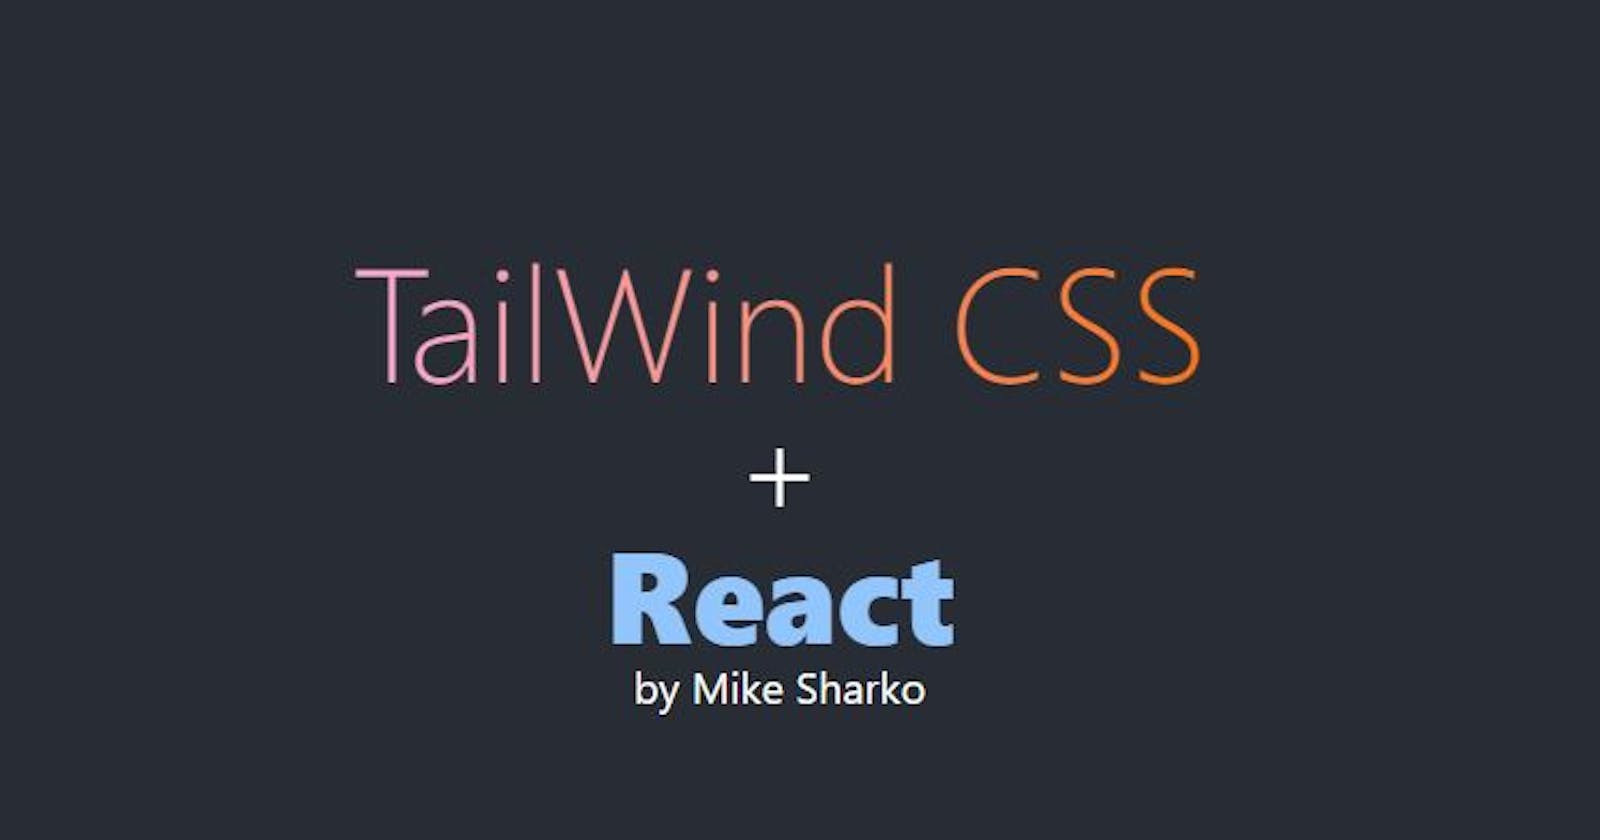 Installing and connecting Tailwind CSS to REACT